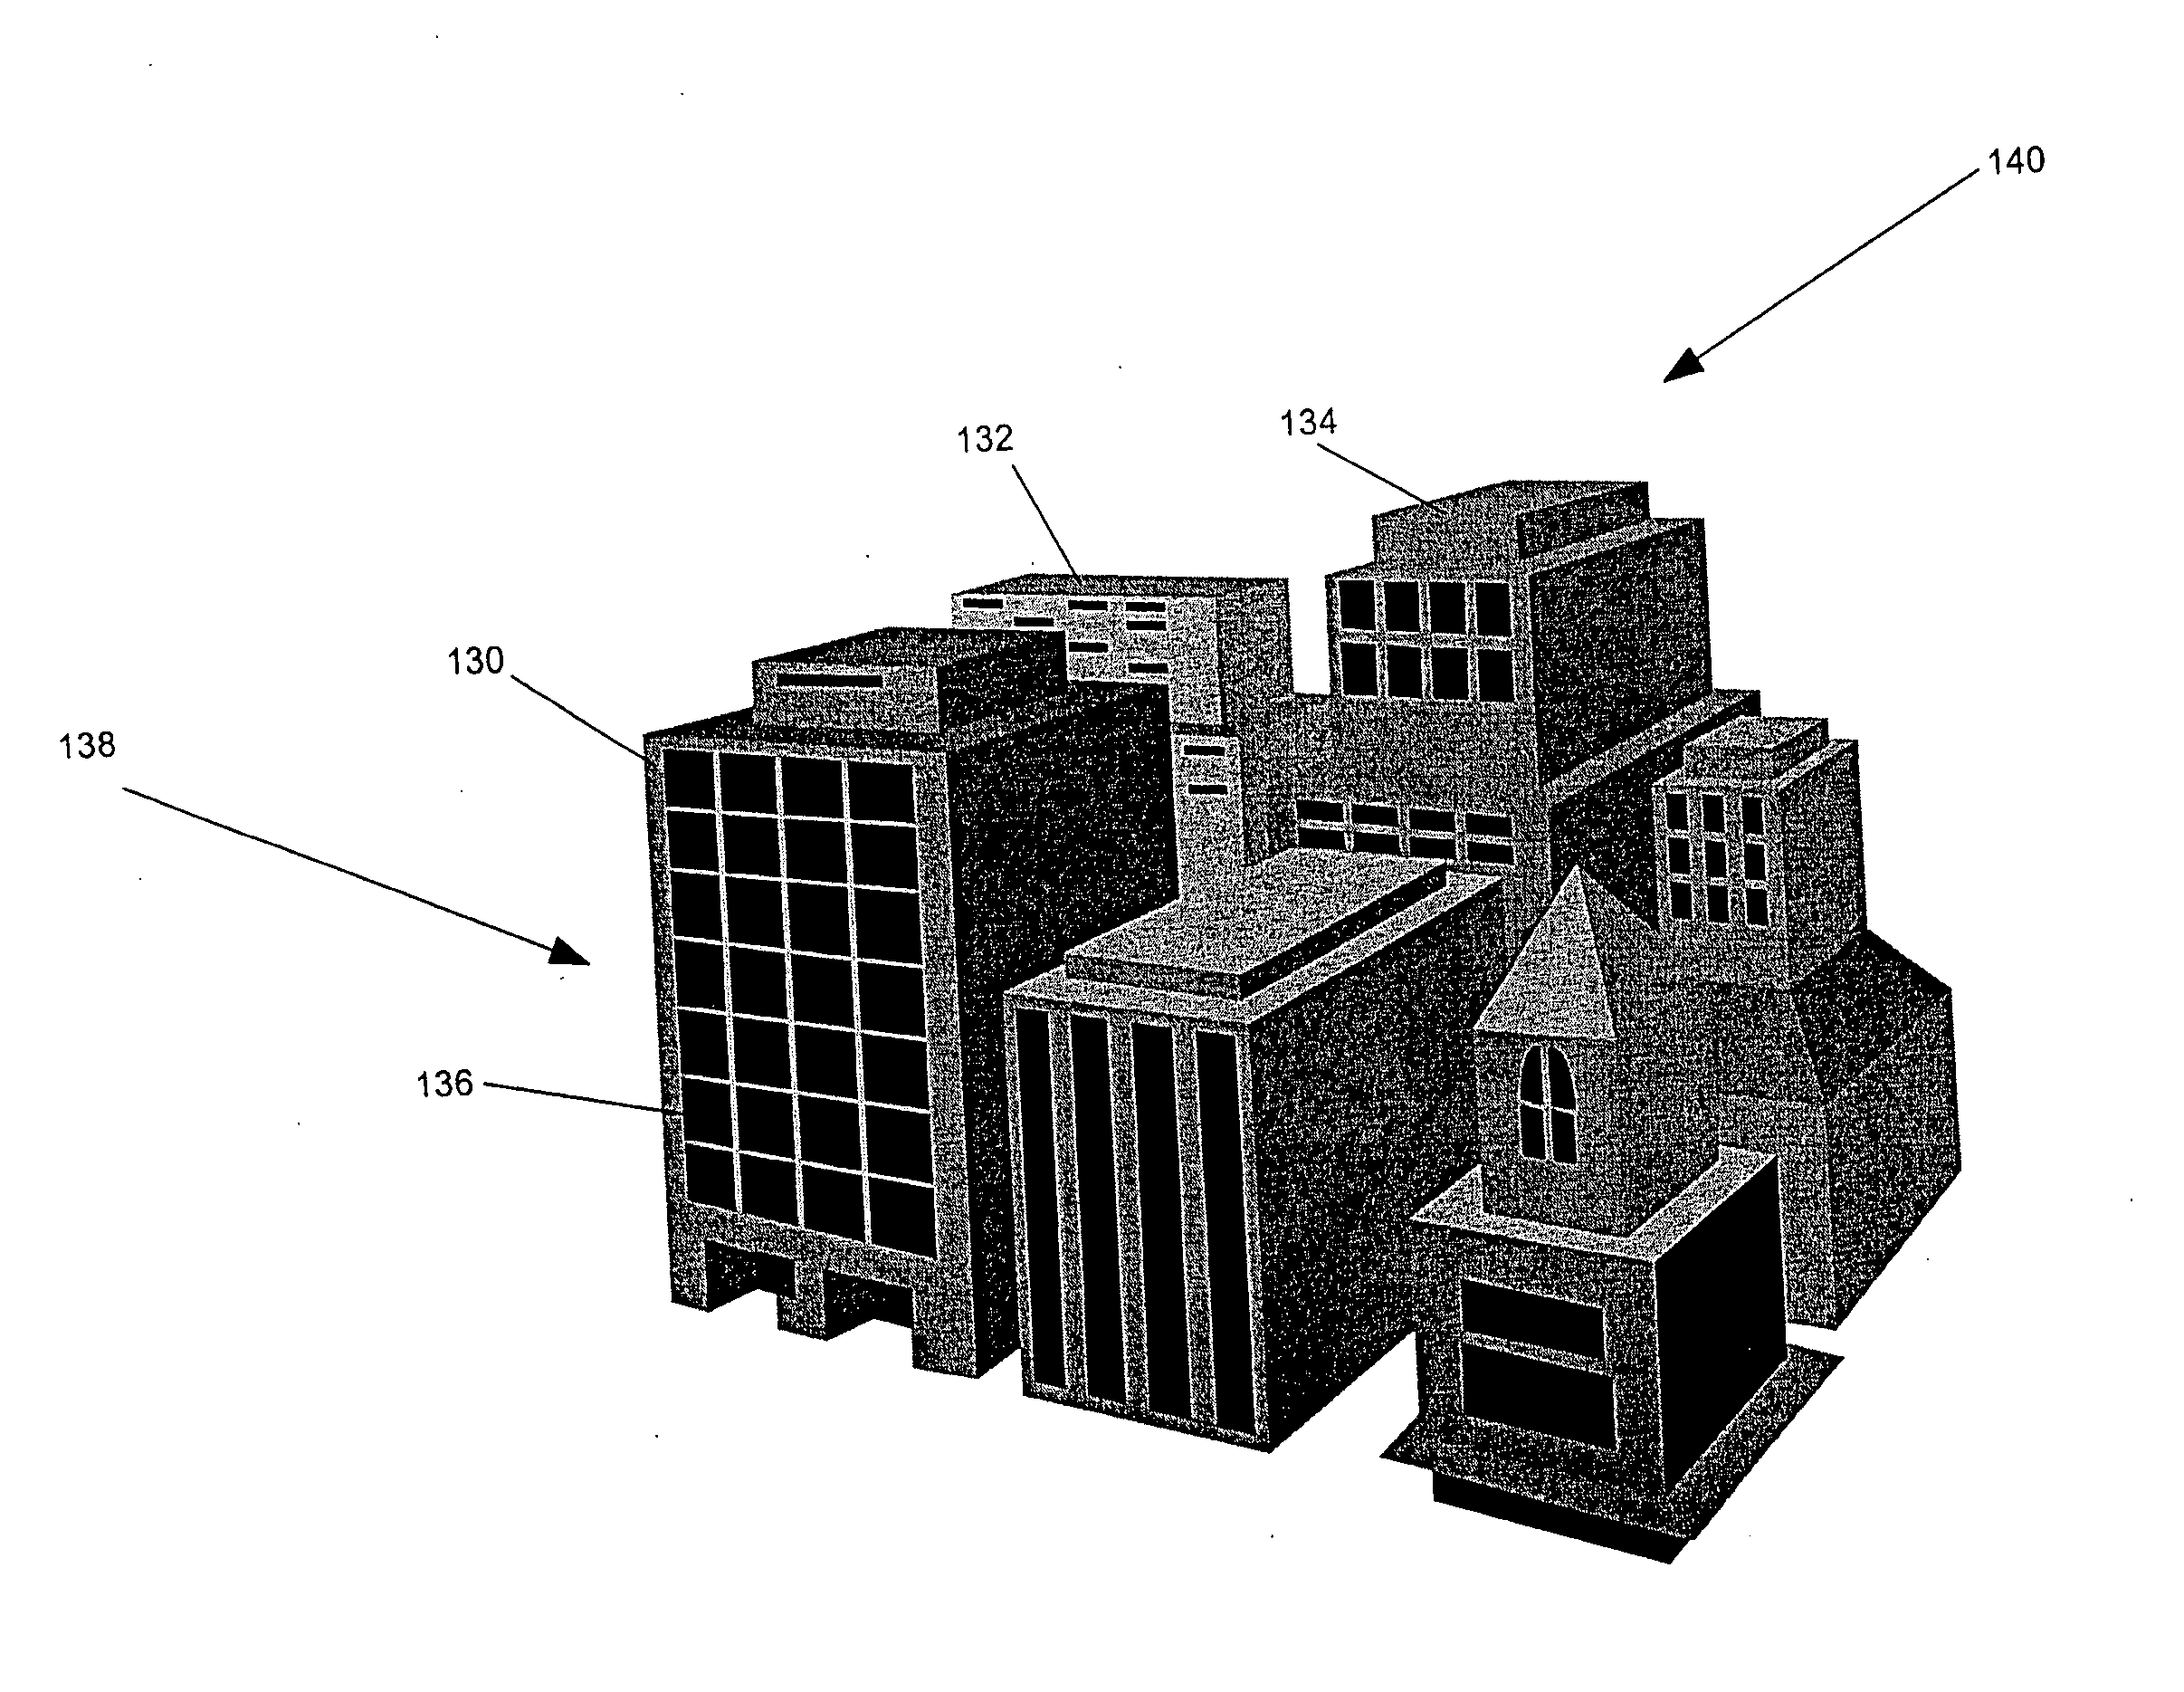 Multiple dwelling unit satellite television delivery system